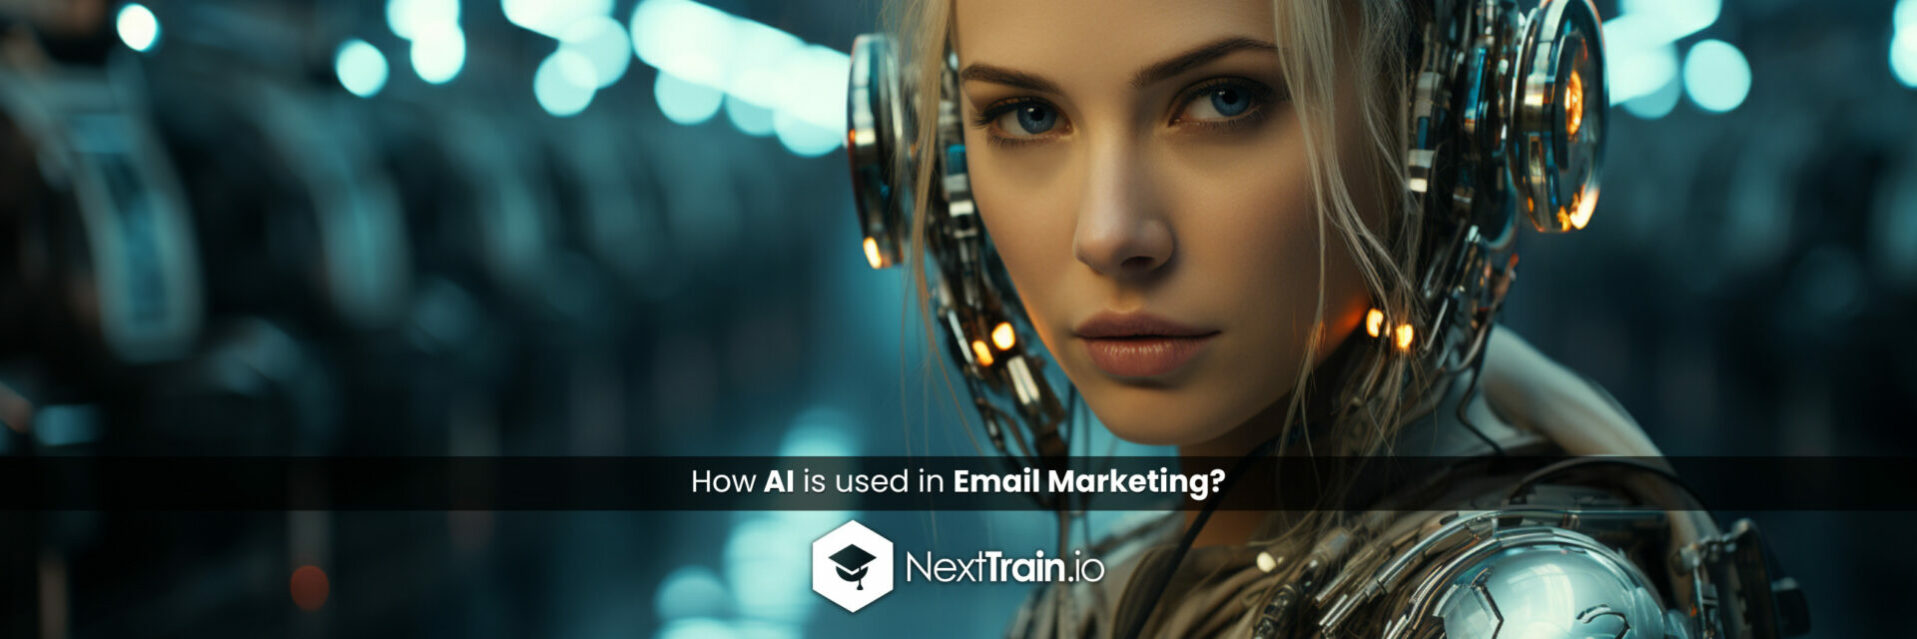 How AI is used in Email Marketing?